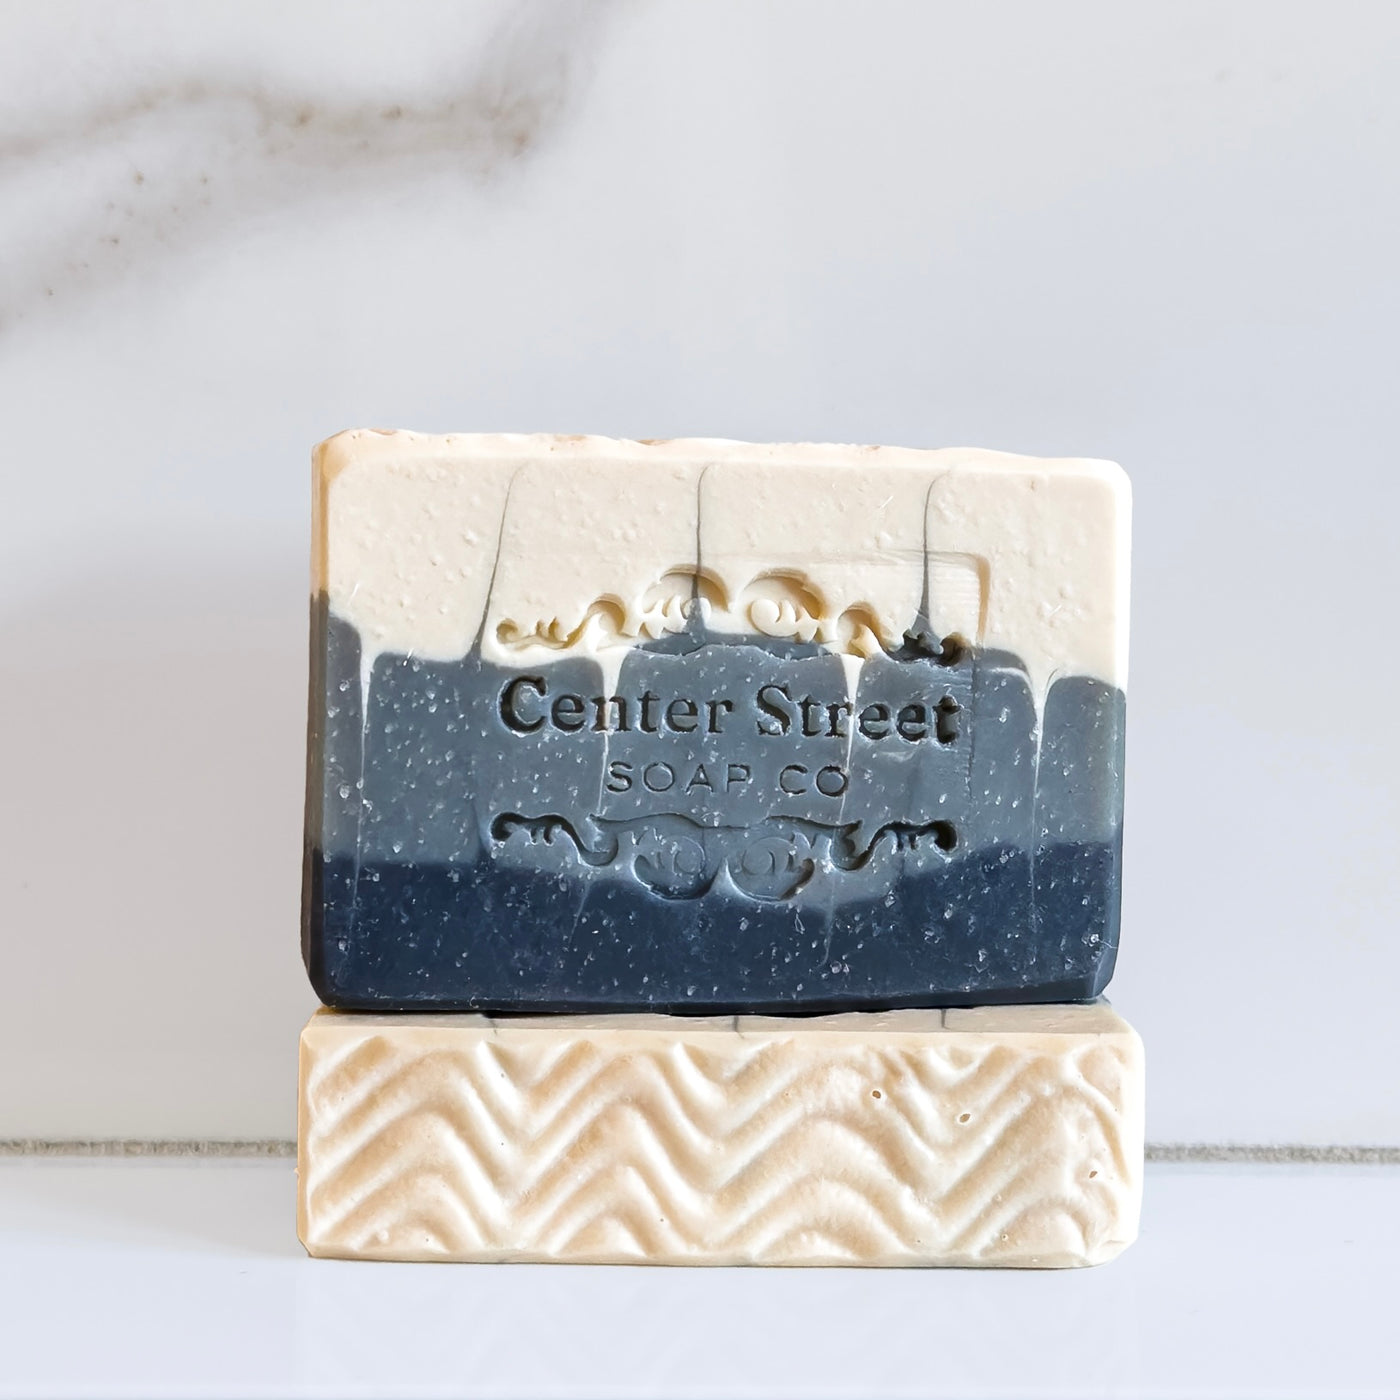 Handcrafted 'Perfect Man' soap bar with white, gray, and black swirls